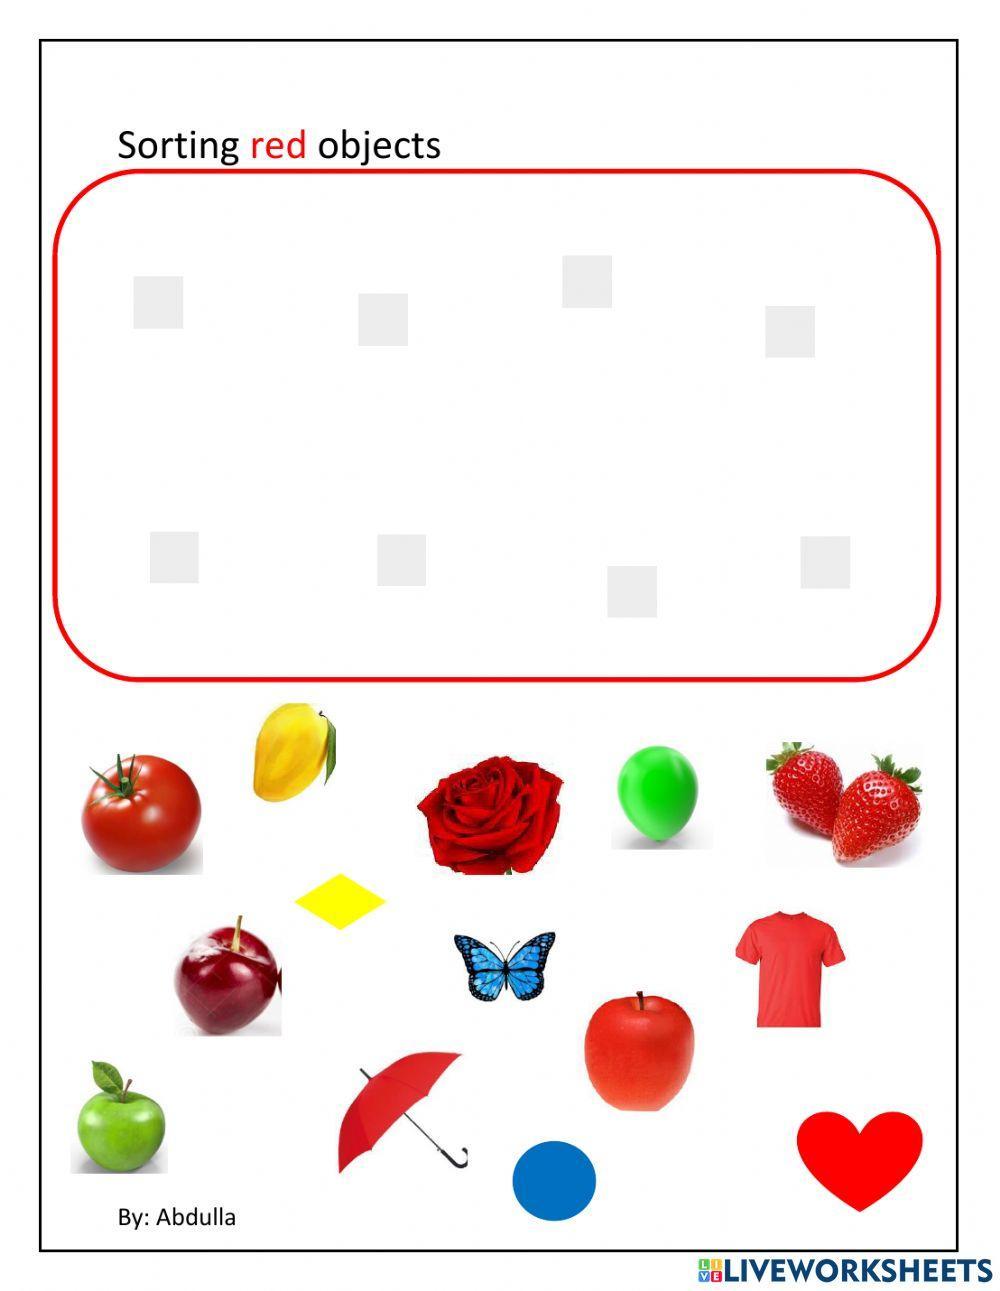 Sorting red color objects